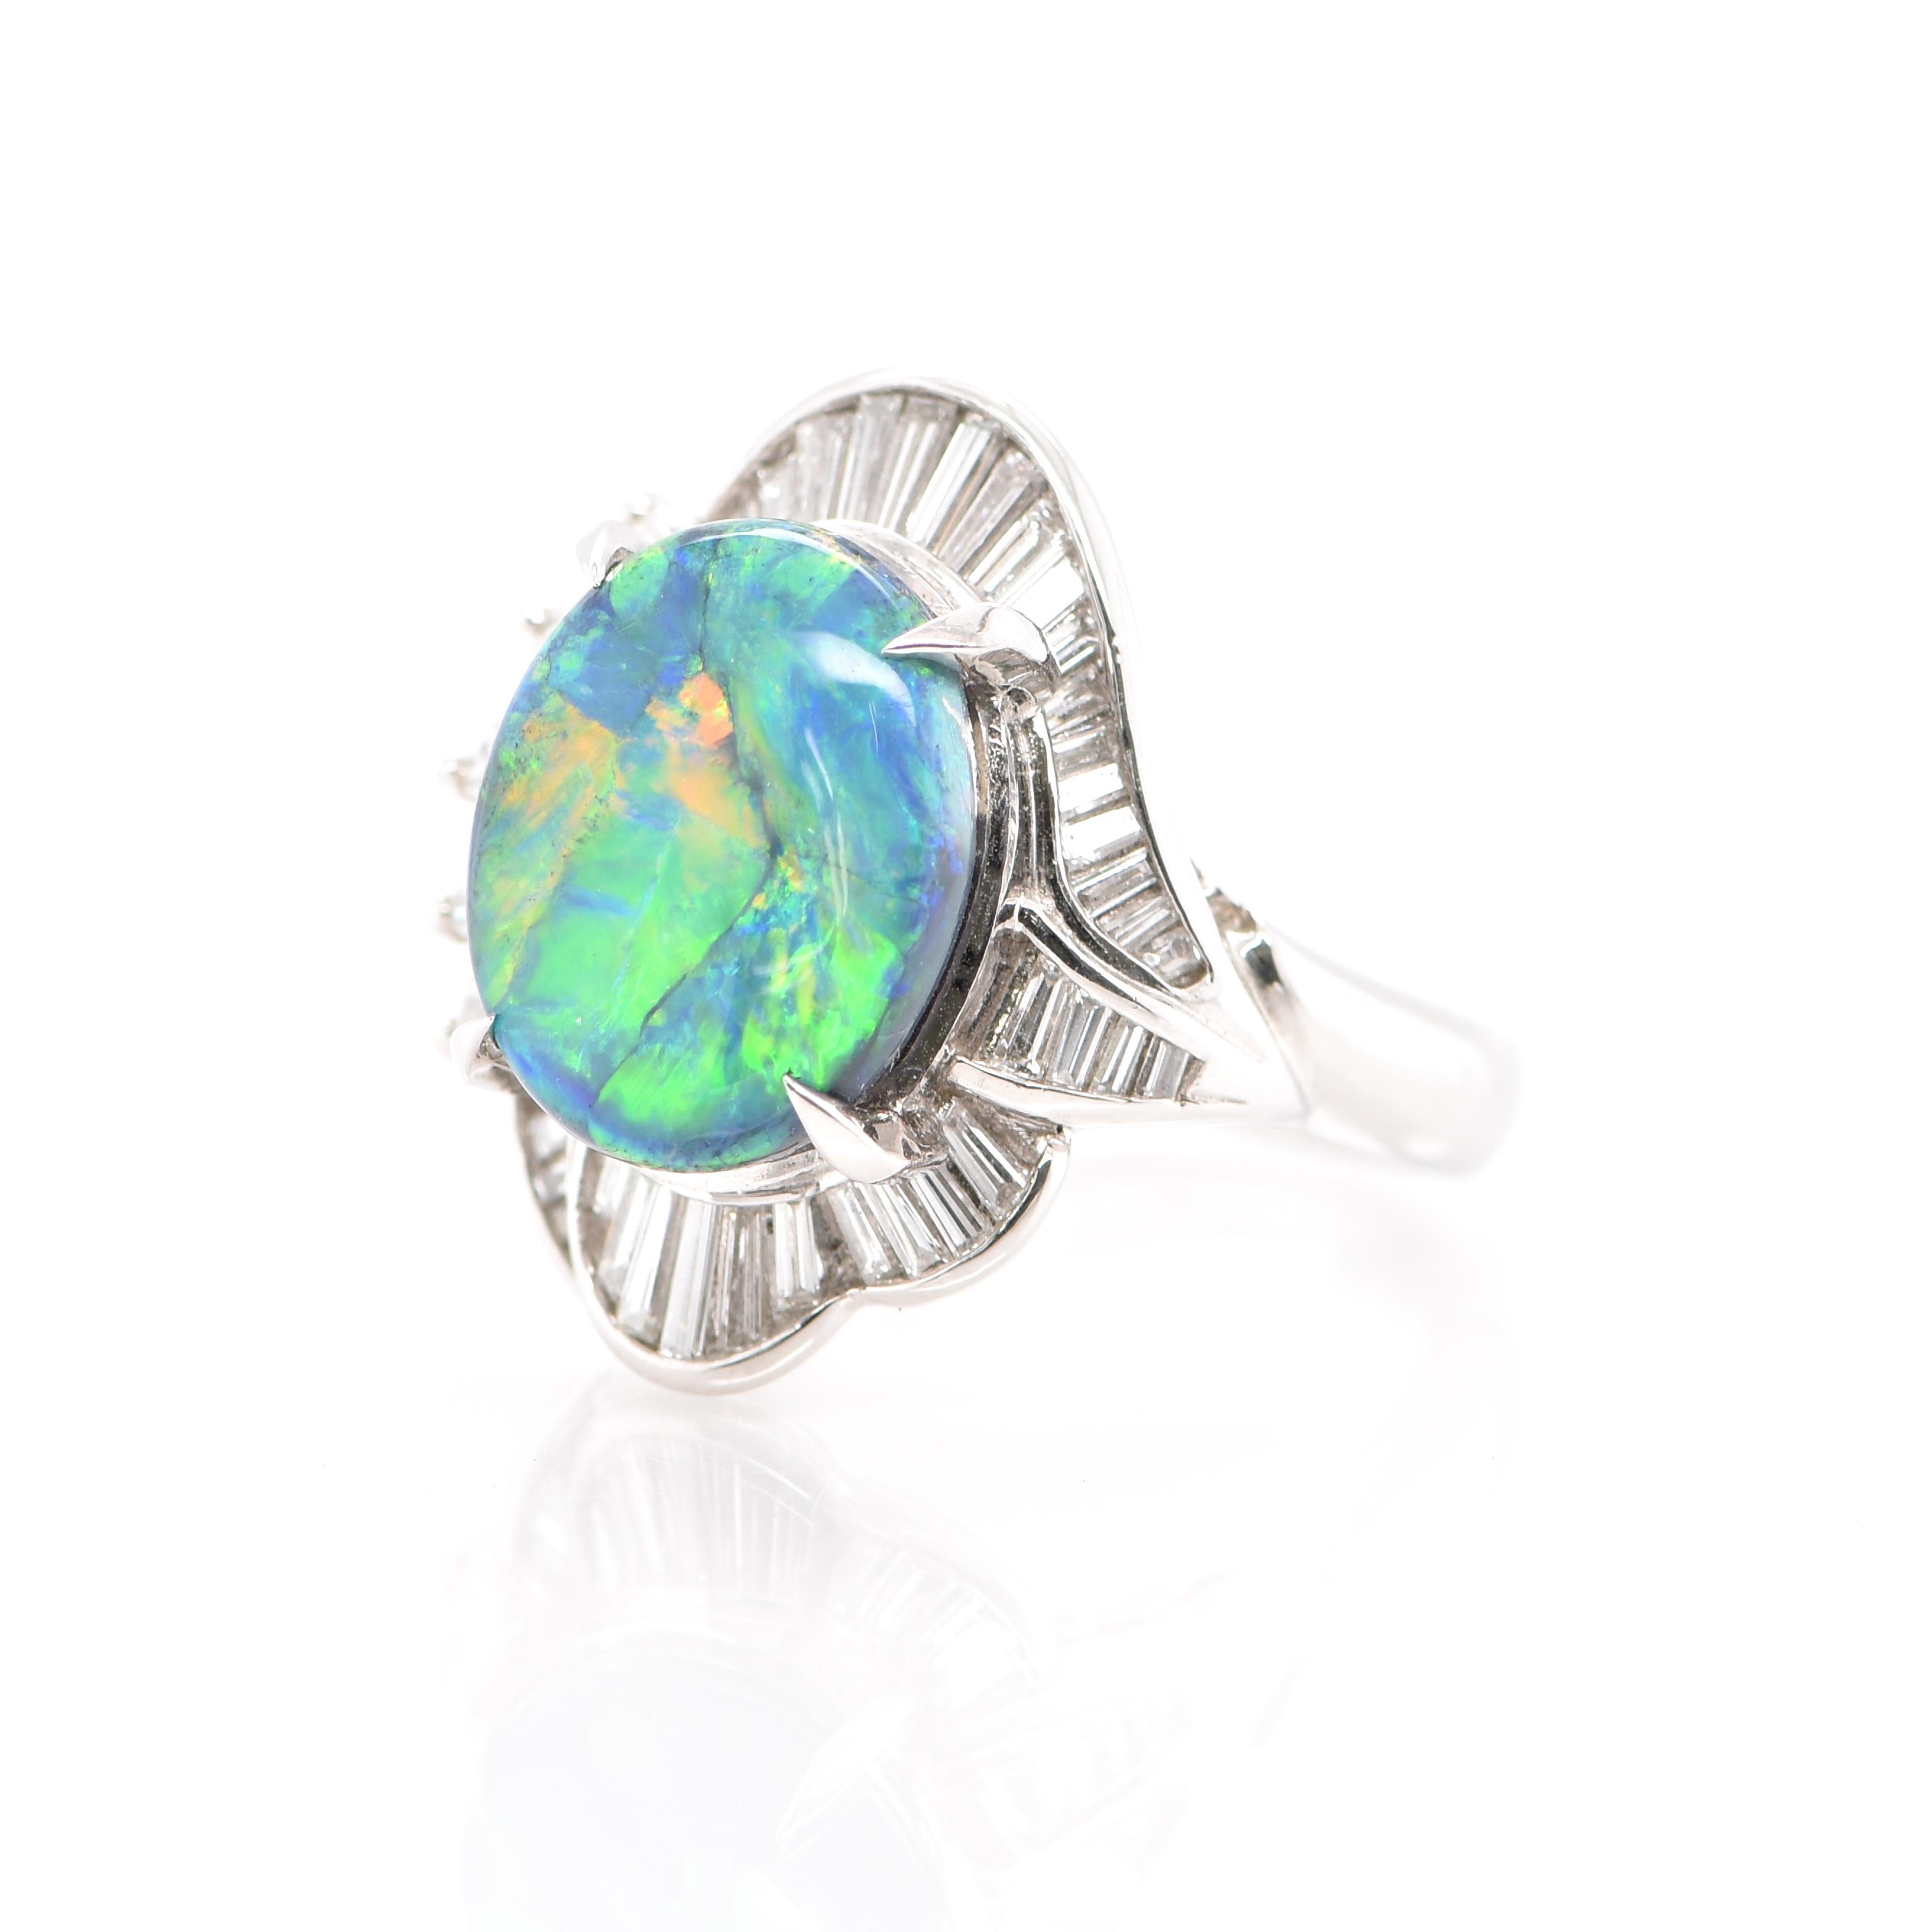 A beautiful Ballerina Cocktail Ring featuring a 4.93 Carat Australian Black Opal and 0.95 Carats of Diamond Accents set in Platinum. Opals are known for exhibiting flashes of rainbow colors known as 